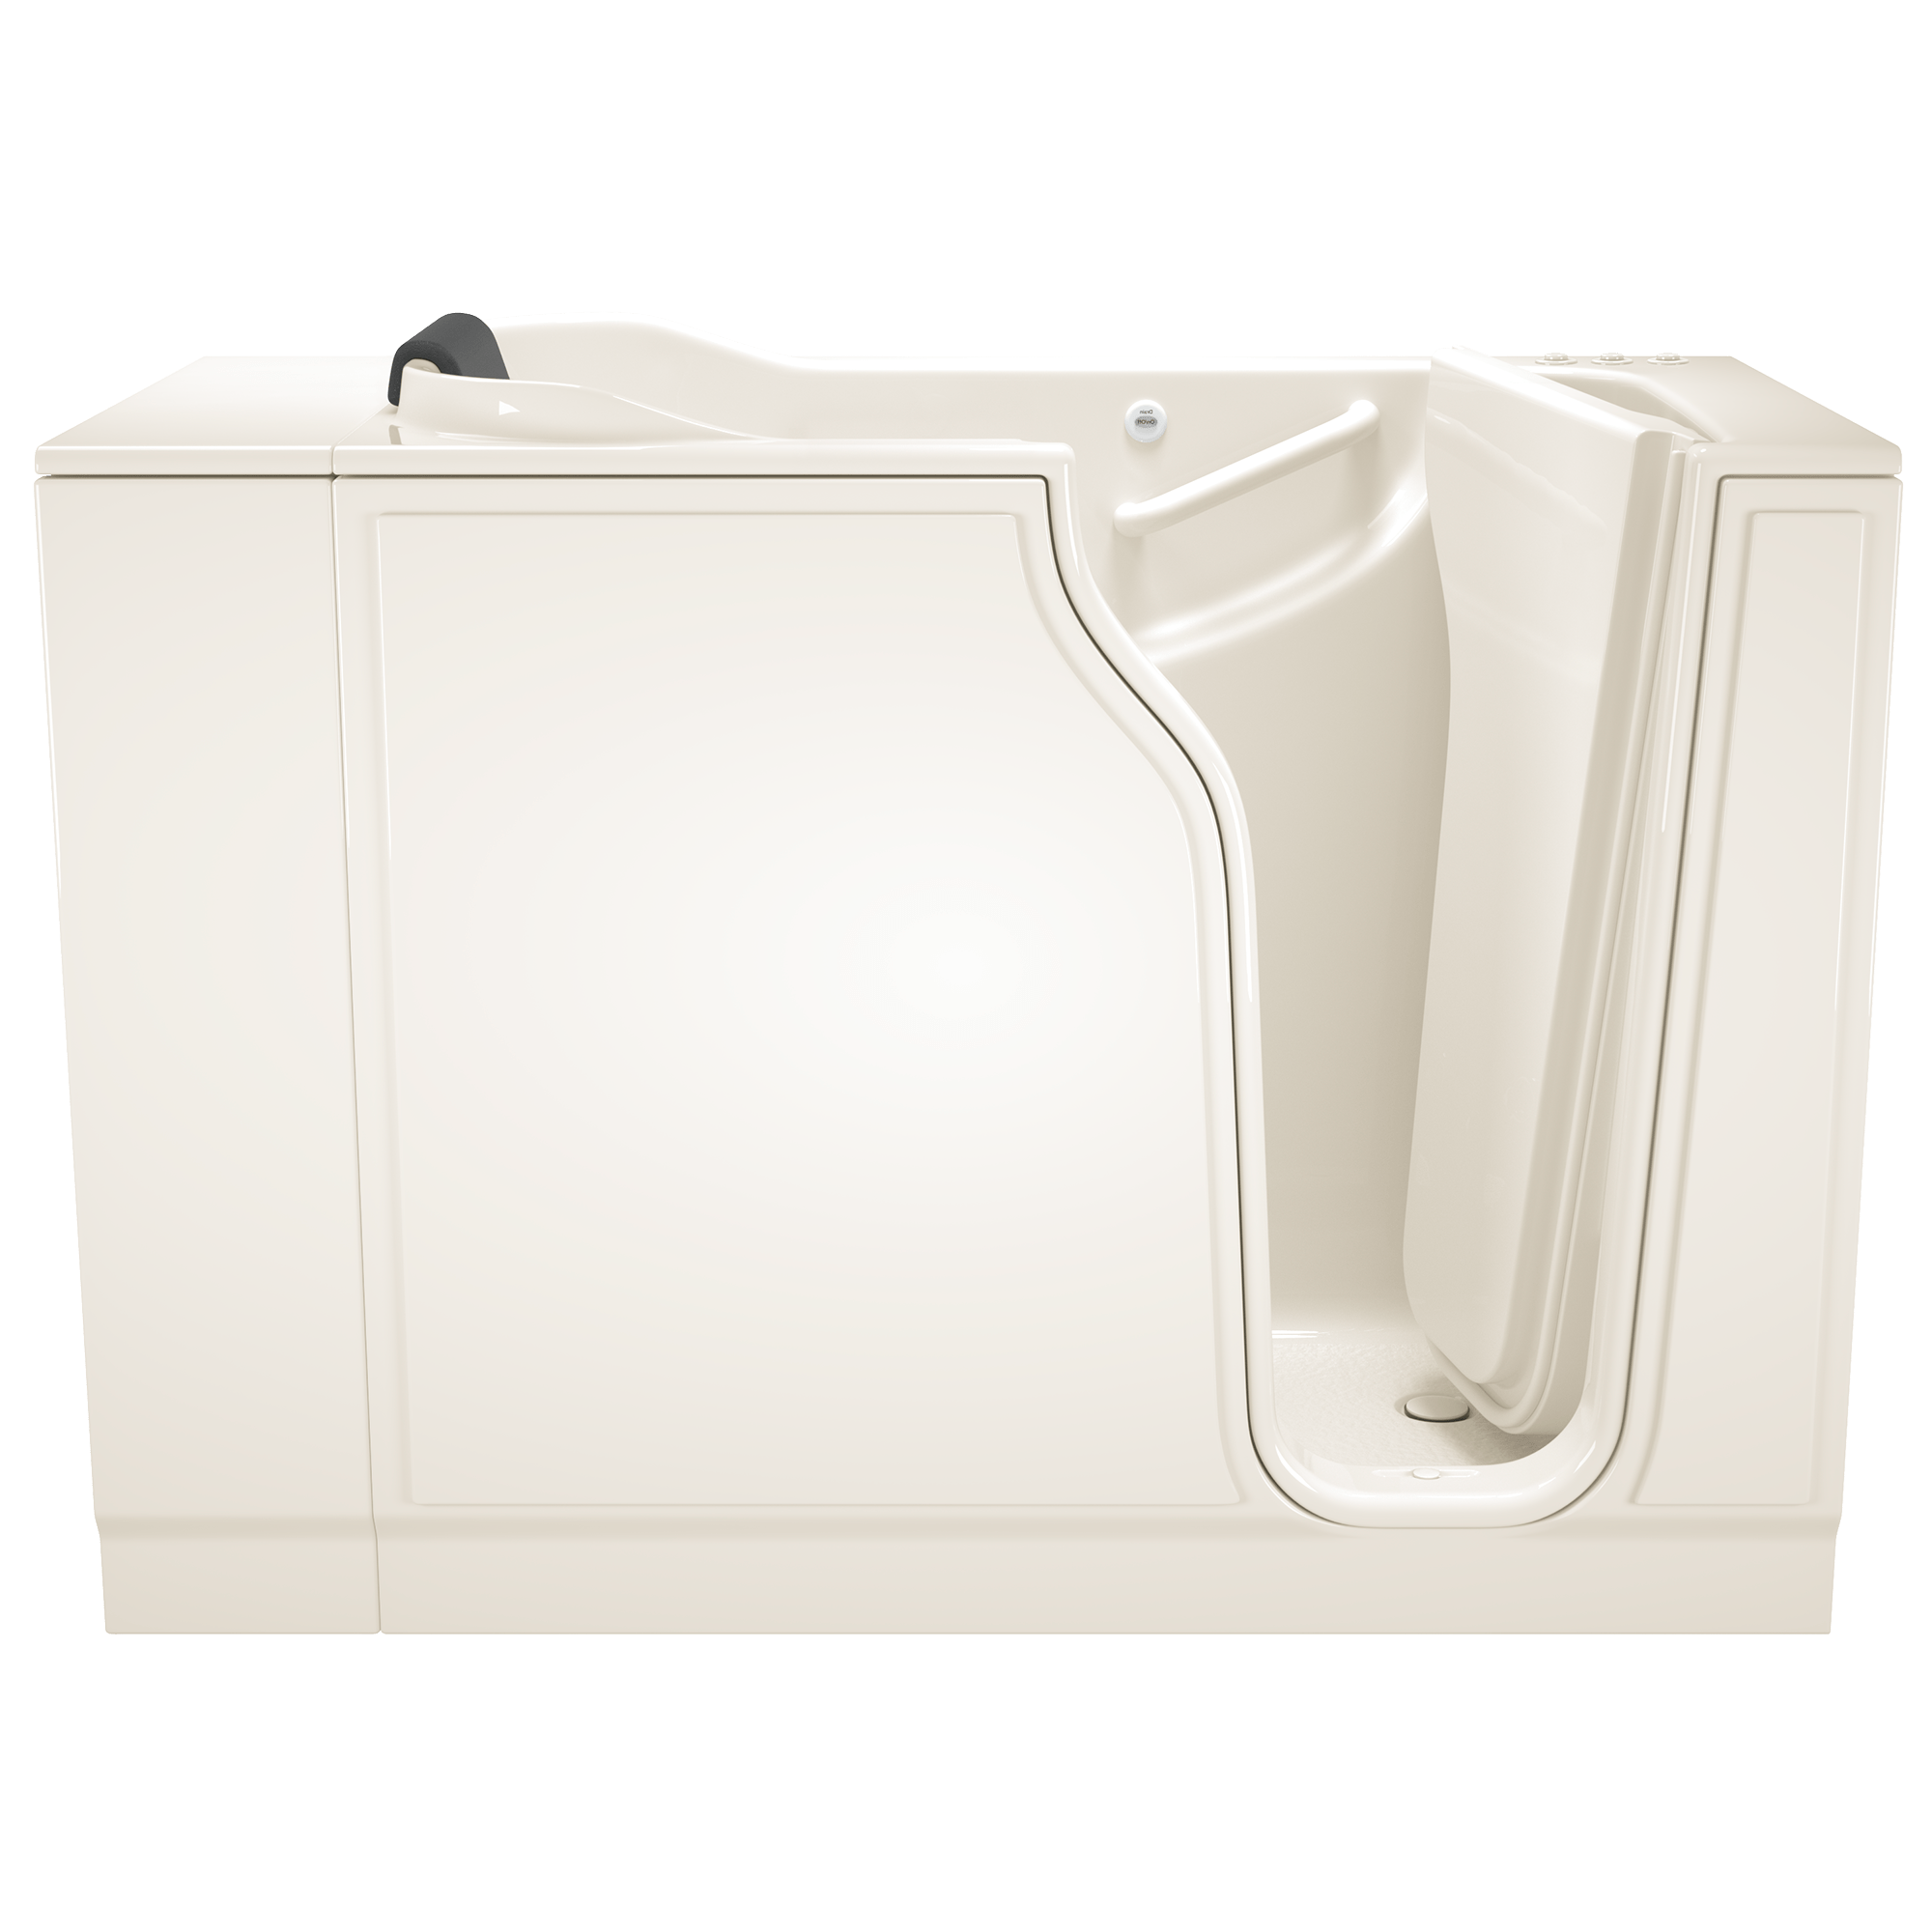 Gelcoat Premium Series 30 x 52 -Inch Walk-in Tub With Combination Air Spa and Whirlpool Systems - Right-Hand Drain